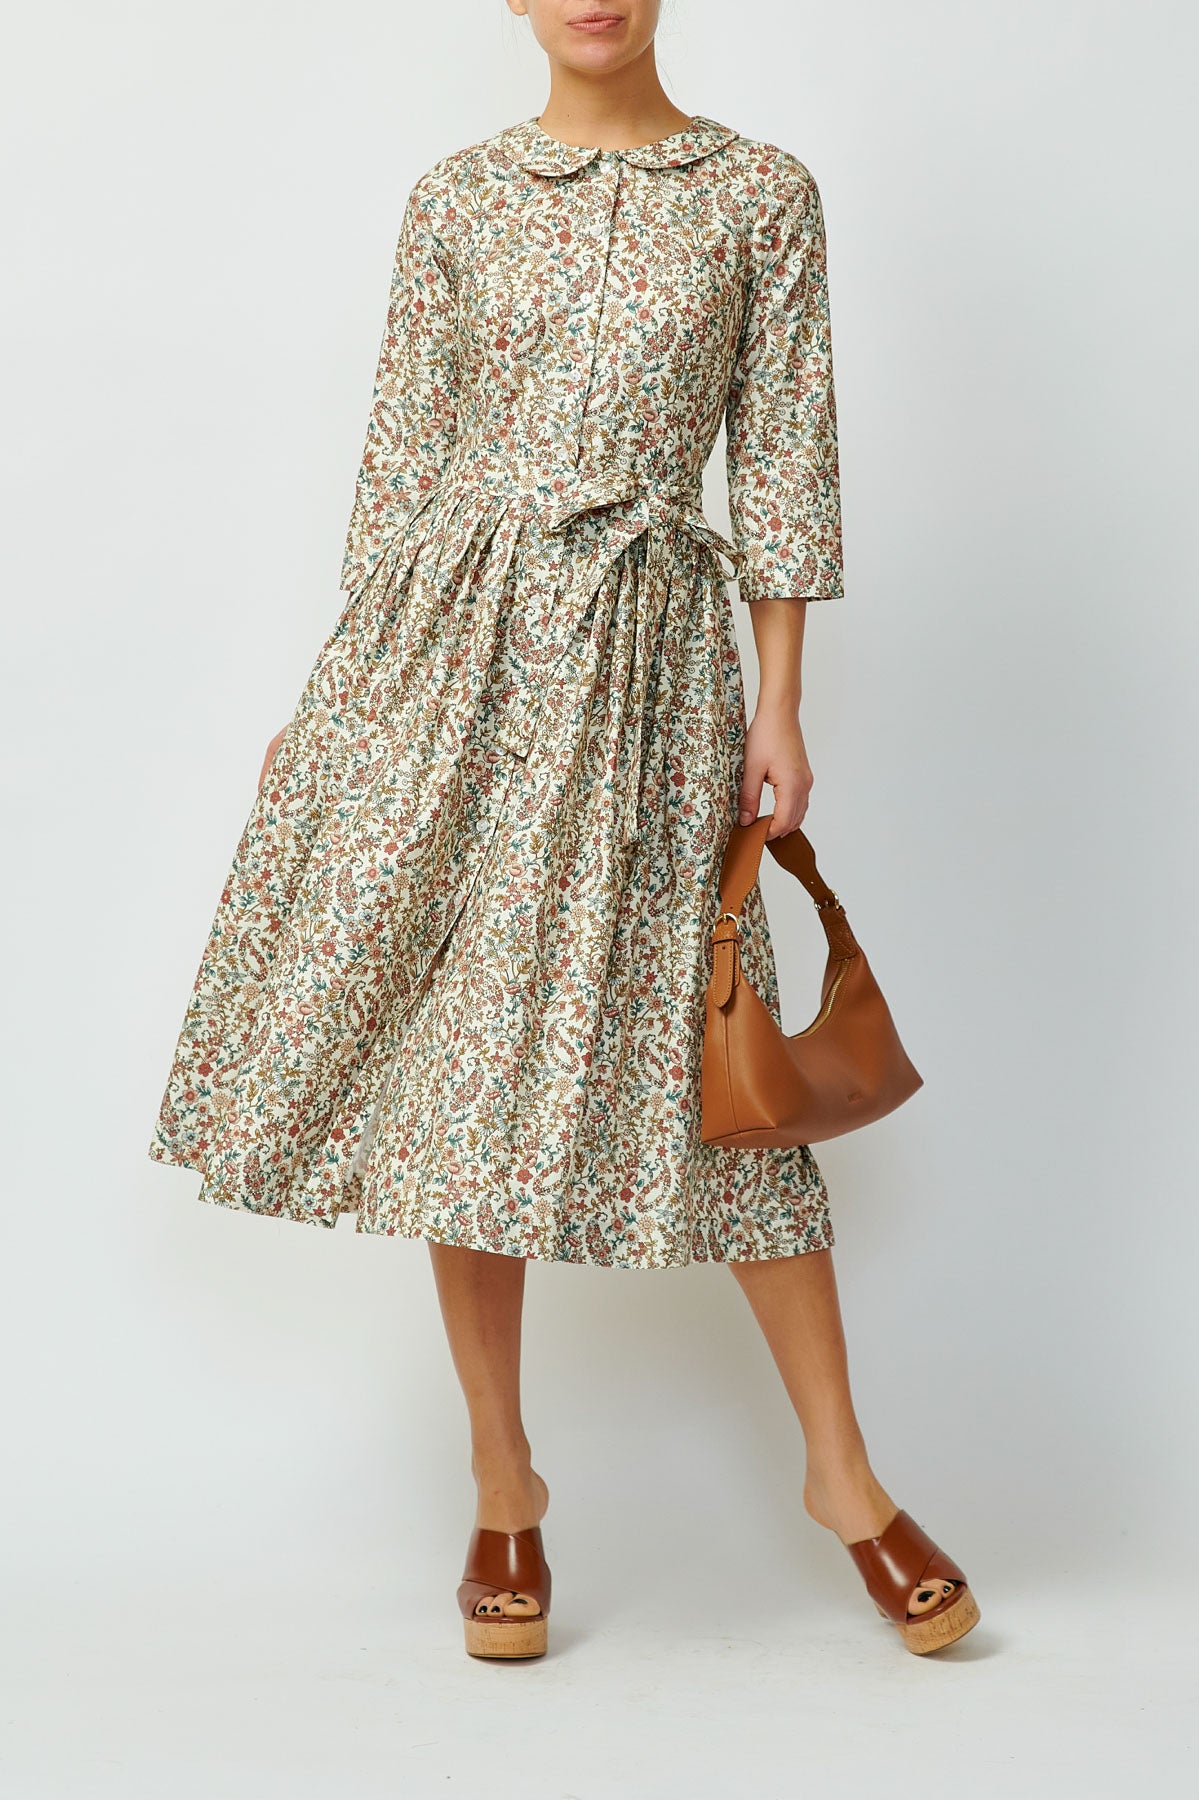 Shirt dress with small flowers on white